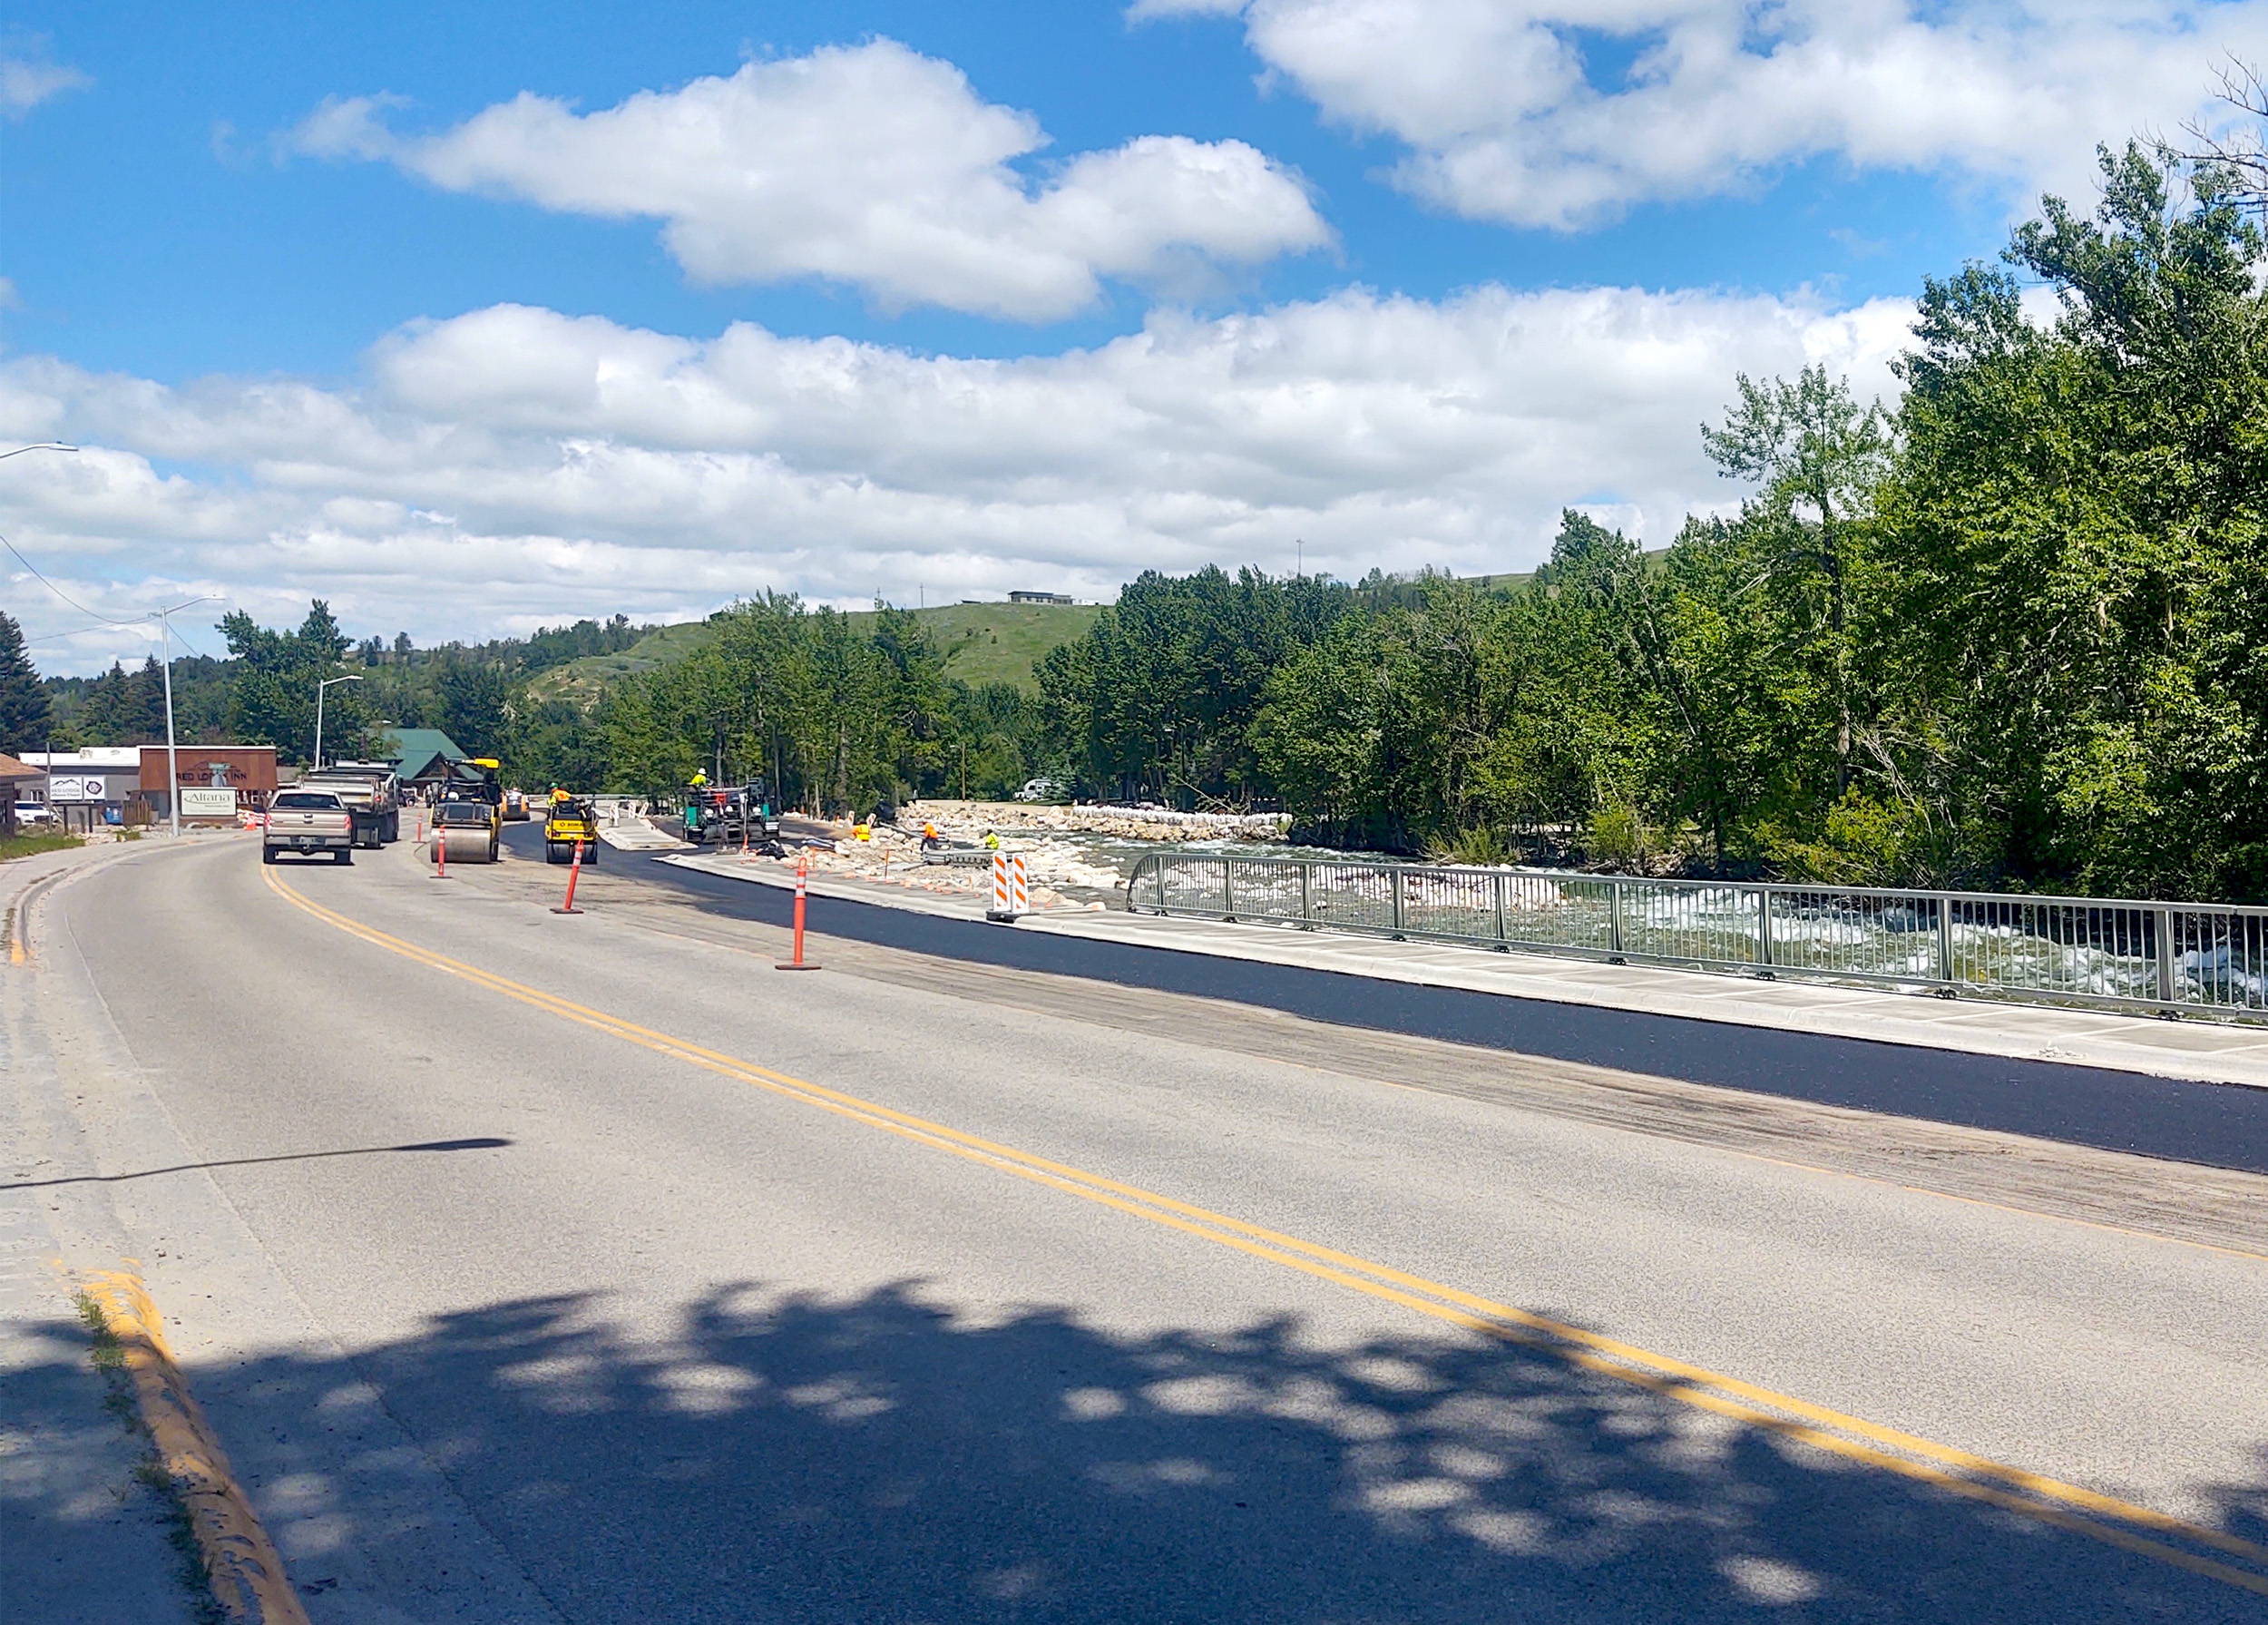 Wilson & Company worked with the Montana Department of Transportation (MDT) to repair highway facilities affected by the June 2022 Rock Creek flooding.